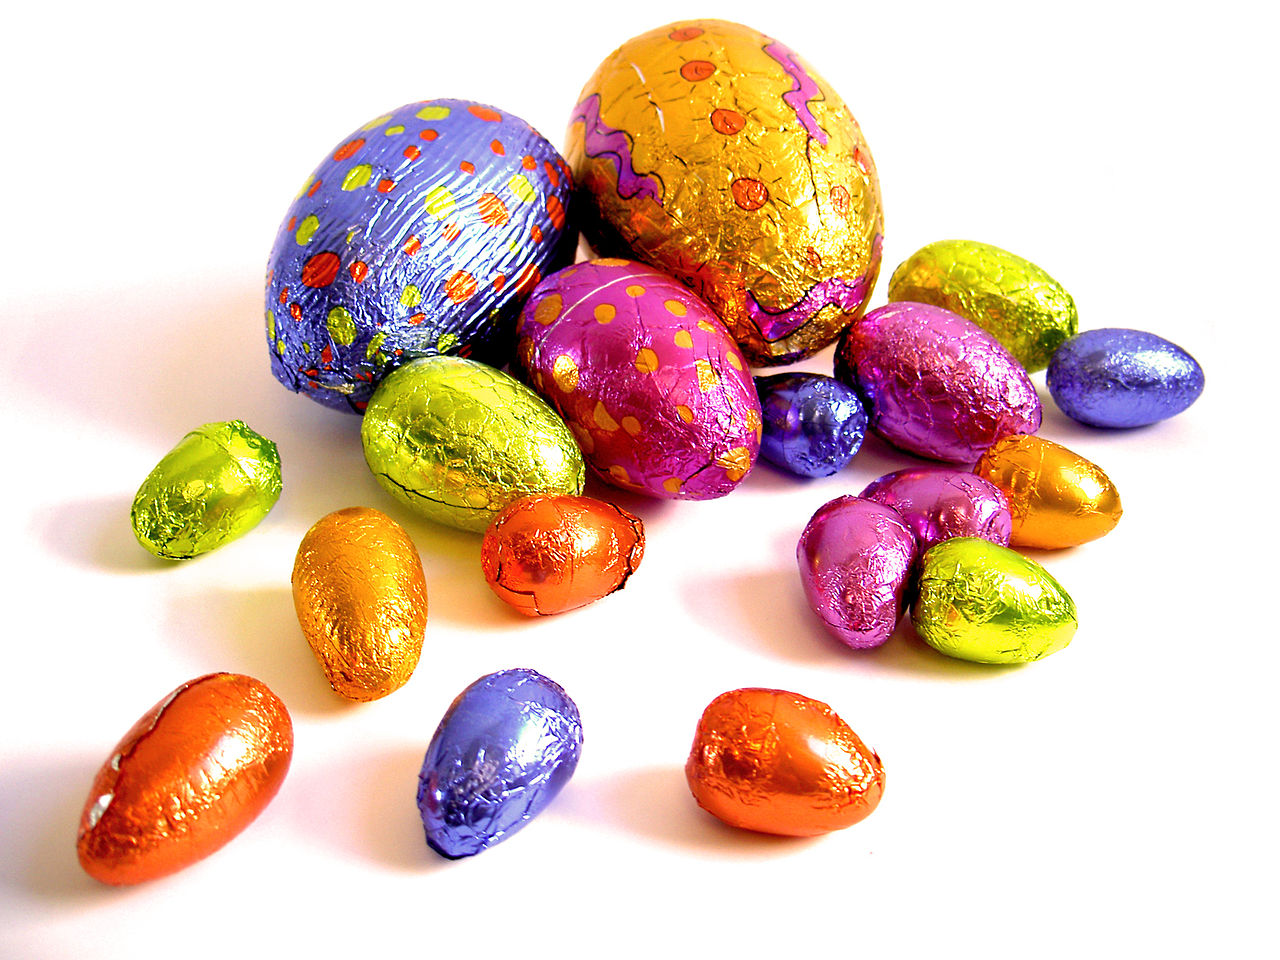 Easter Eggs from an Easter Egg Hunt (such as the one of this website!) Photo: Wikimedia/Lotus Head/Creative Commons 3.0 by Attribution/Share-Alike.